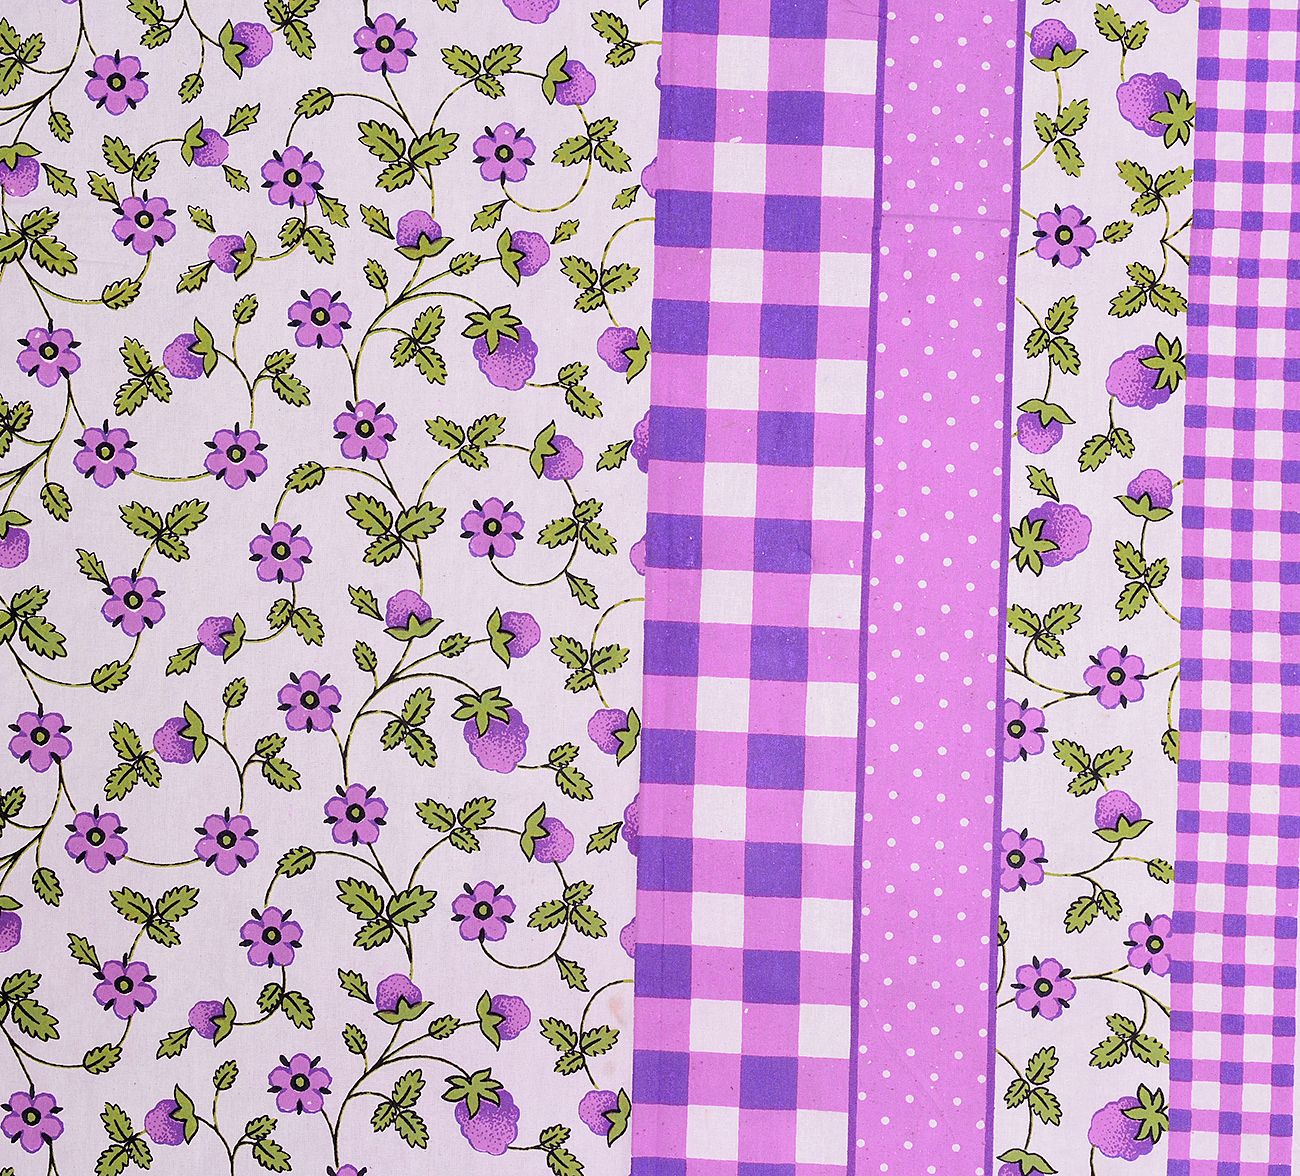 Purple Boarder With Check Print And Dot Flower Pattern Single Bed Sheet With 2 Pillow Cover